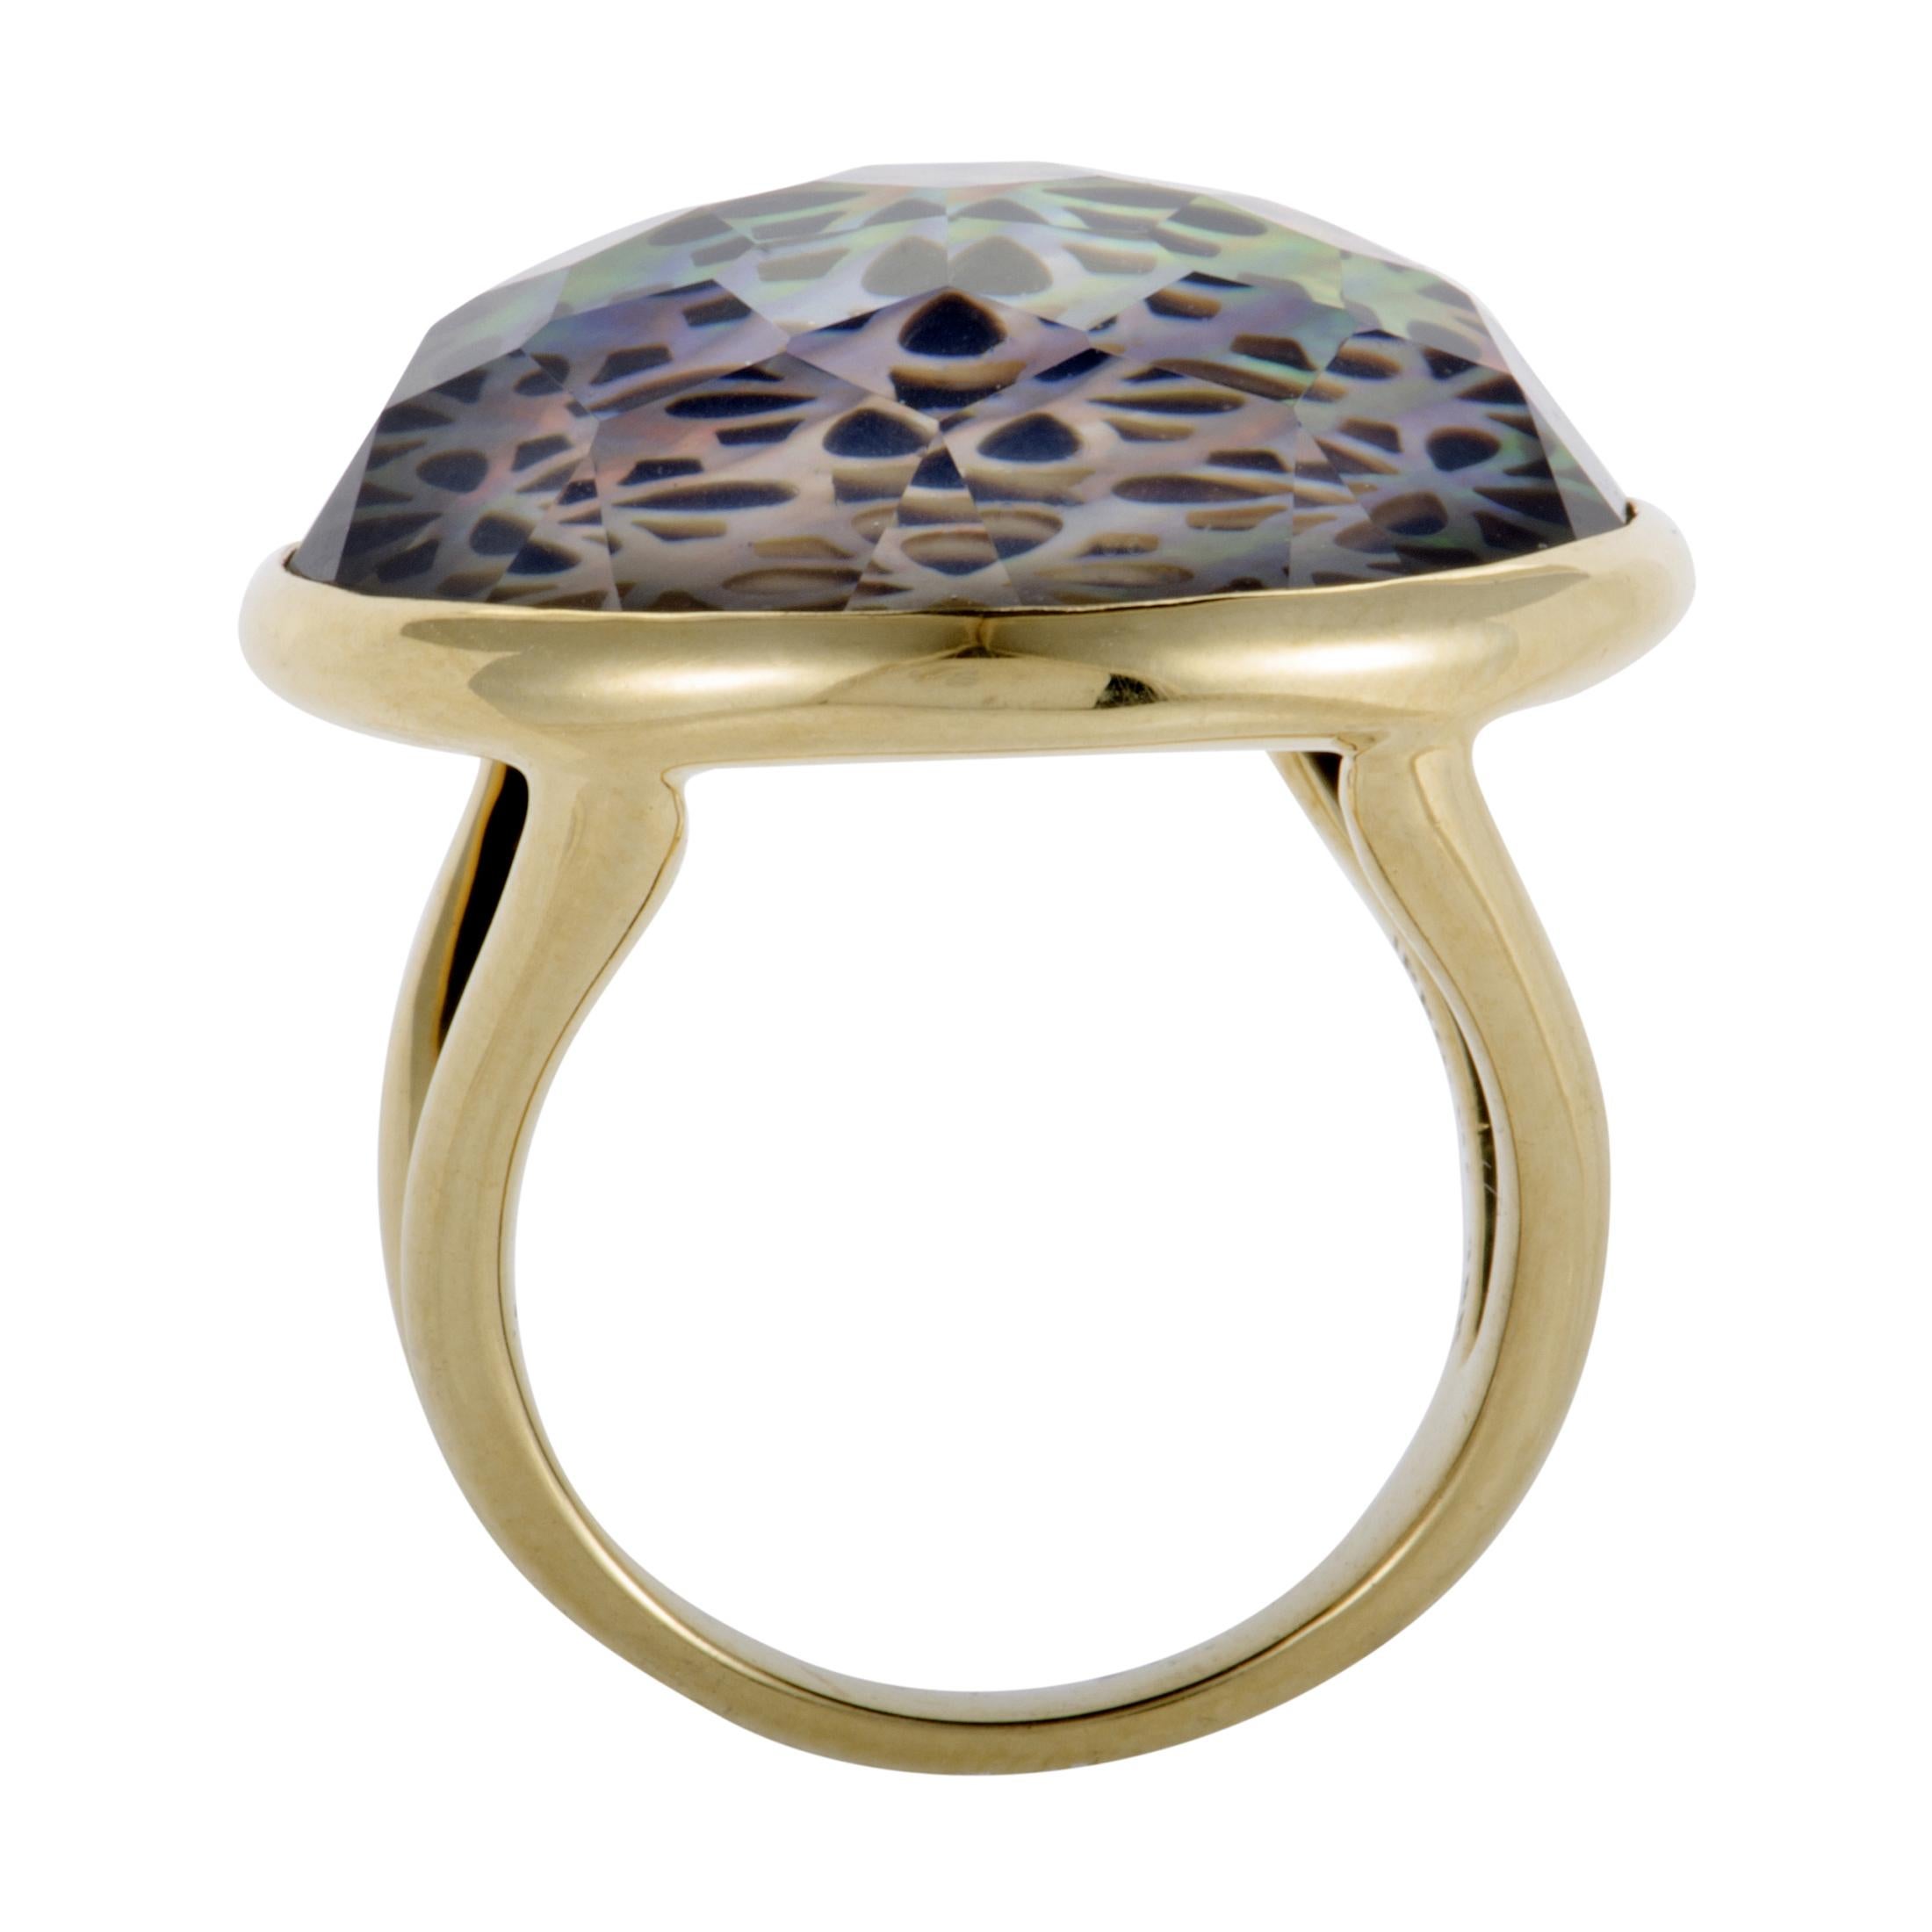 The intricate décor comprised of sublime mother of pearl, remarkable onyx and clear quartz gives this ring an attractive, offbeat look, while the gleaming 18K yellow gold adds a nifty refined touch. The ring is presented within Ippolita’s